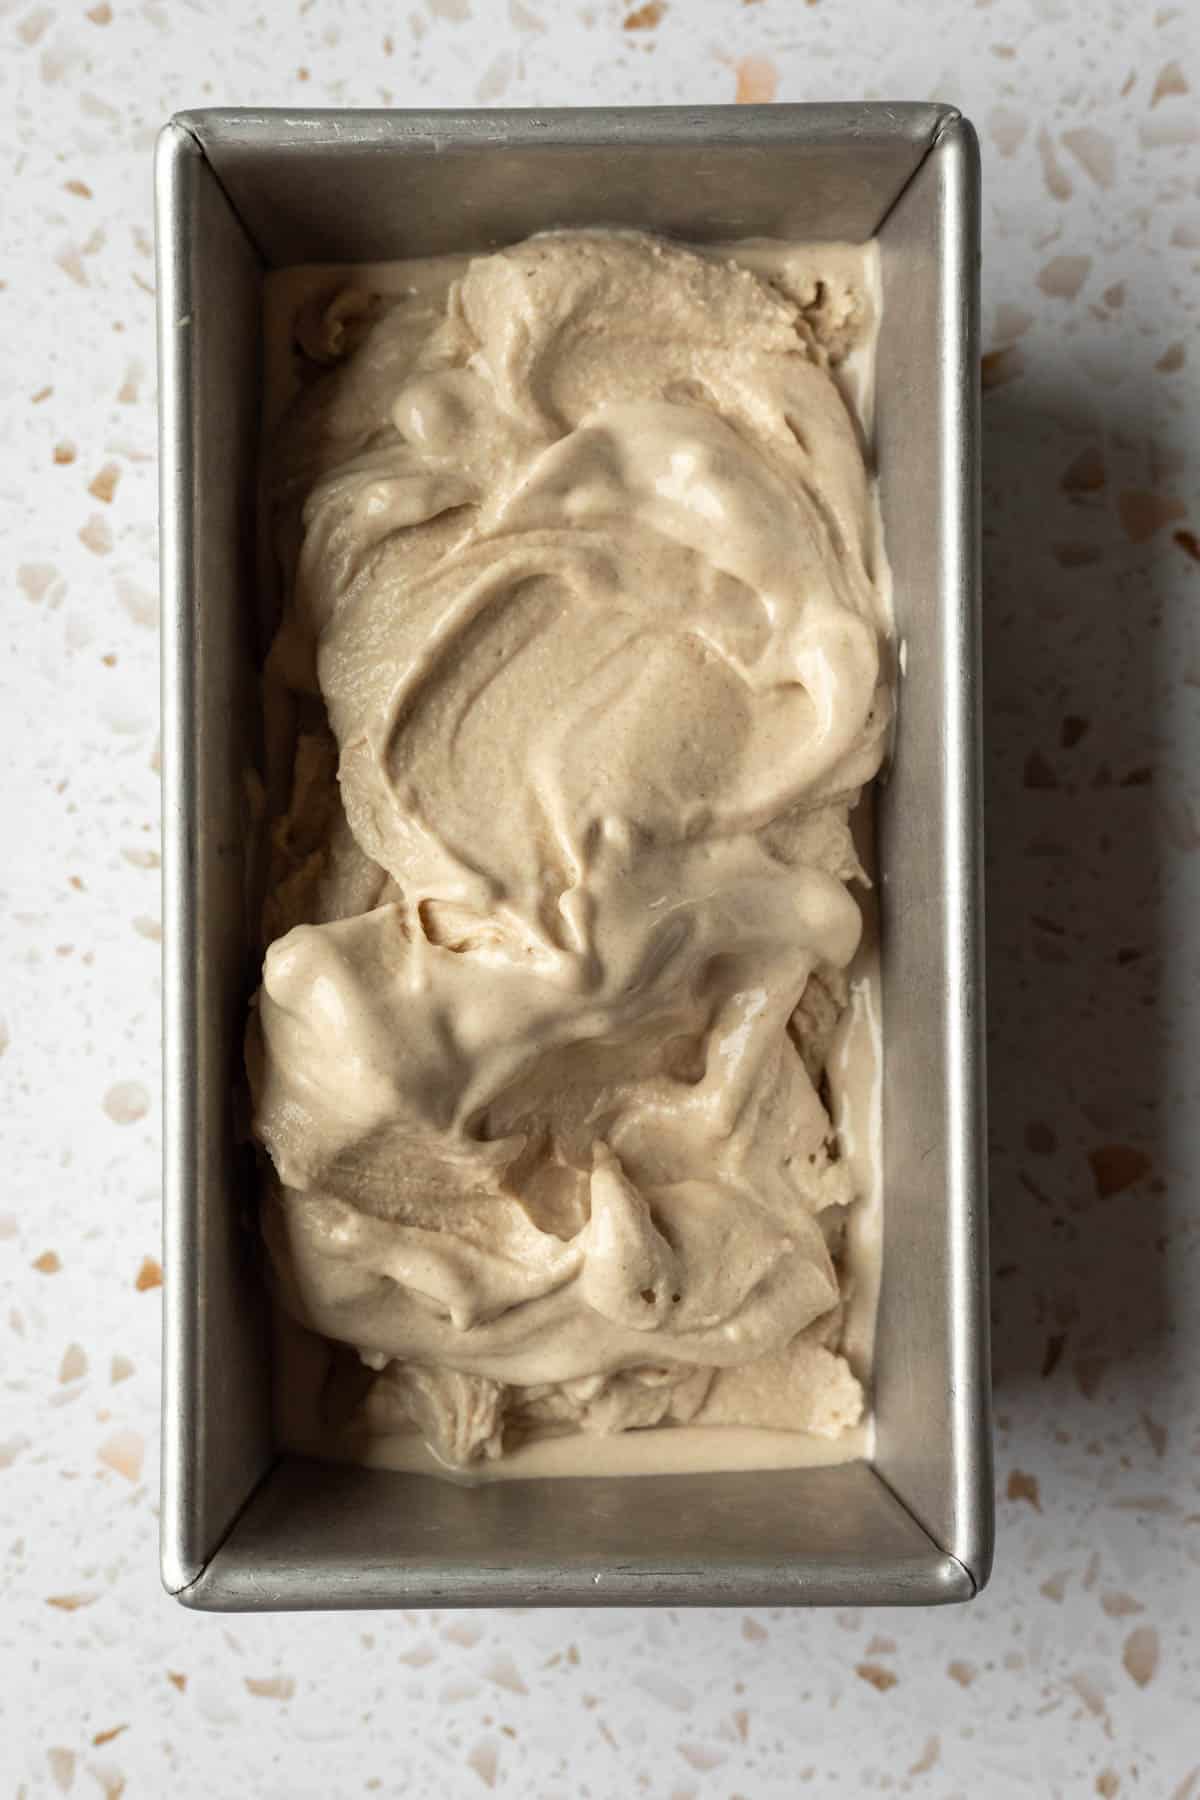 Oat-cashew date ice cream with a soft-serve consistency in a loaf pan.